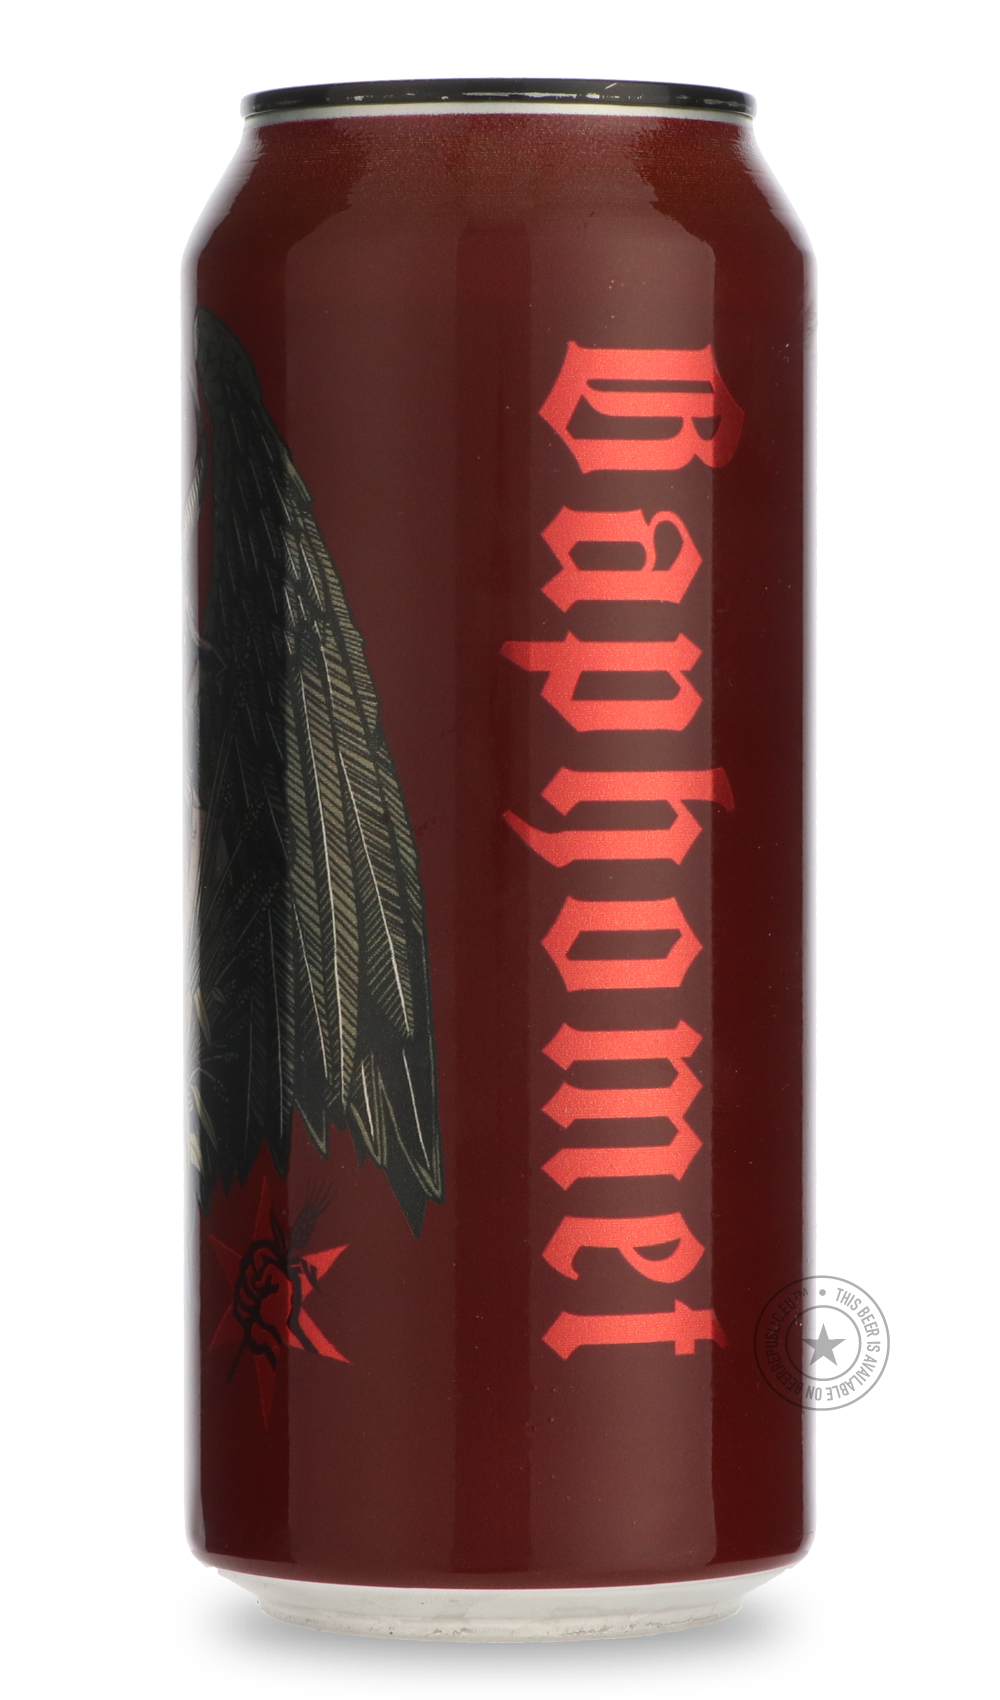 -Revolution- Baphomet-Brown & Dark- Only @ Beer Republic - The best online beer store for American & Canadian craft beer - Buy beer online from the USA and Canada - Bier online kopen - Amerikaans bier kopen - Craft beer store - Craft beer kopen - Amerikanisch bier kaufen - Bier online kaufen - Acheter biere online - IPA - Stout - Porter - New England IPA - Hazy IPA - Imperial Stout - Barrel Aged - Barrel Aged Imperial Stout - Brown - Dark beer - Blond - Blonde - Pilsner - Lager - Wheat - Weizen - Amber - Ba